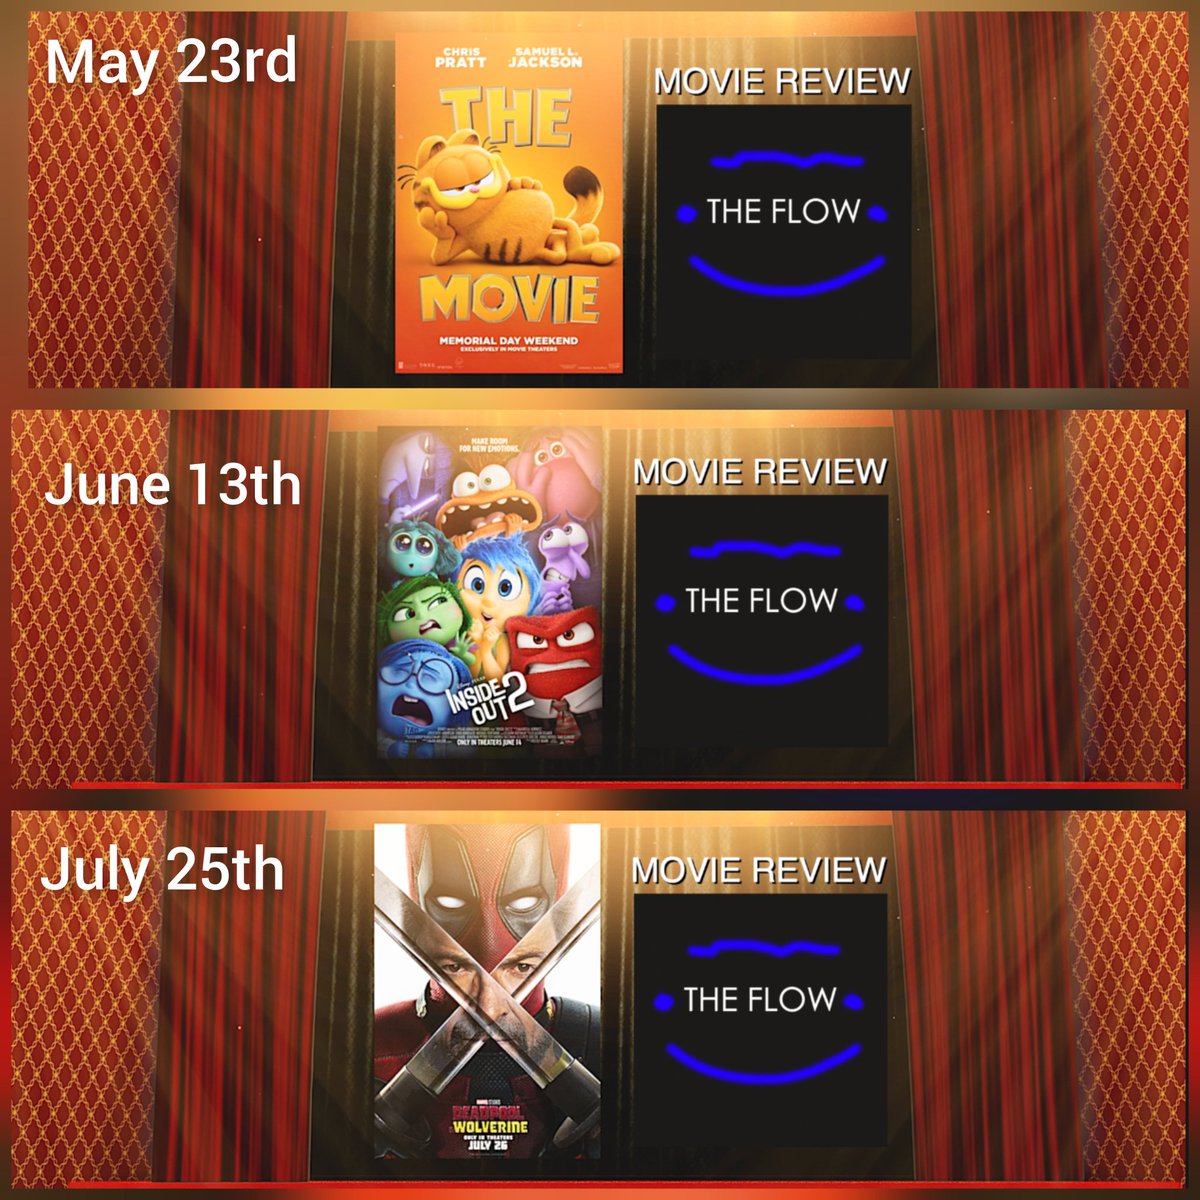 Here's our #upcoming #moviereviews #theflow will cover this summer movie season! 
This Thursday May 23rd #thegarfieldmovie 
Thursday June 13th #InsideOut2
Thursday July 25th #deadpoolandwolverine 

Expect them on #youtube FB TikTok IG and X (twitter) when they drop immediately